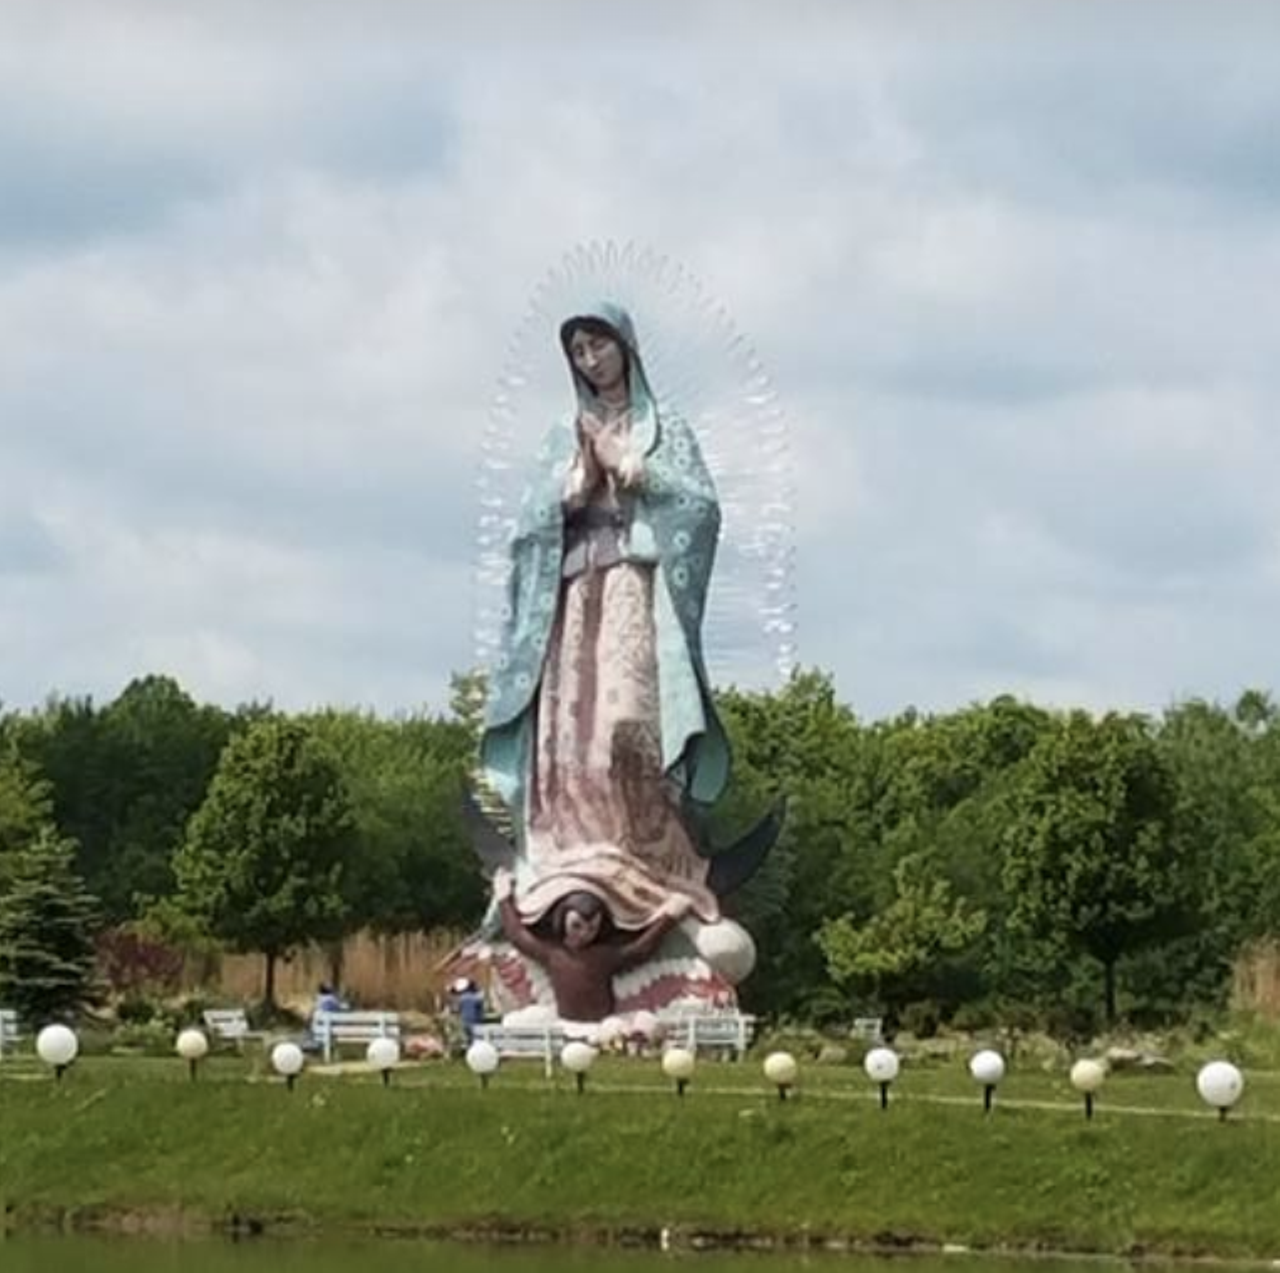  World’s Tallest Our Lady of Guadalupe Statue
6601 Ireland Rd., Windsor 
Located in Windsor, around 50 miles east of downtown, just before you get to Pennsylvania, stands this religious statue, measuring 33 feet tall.